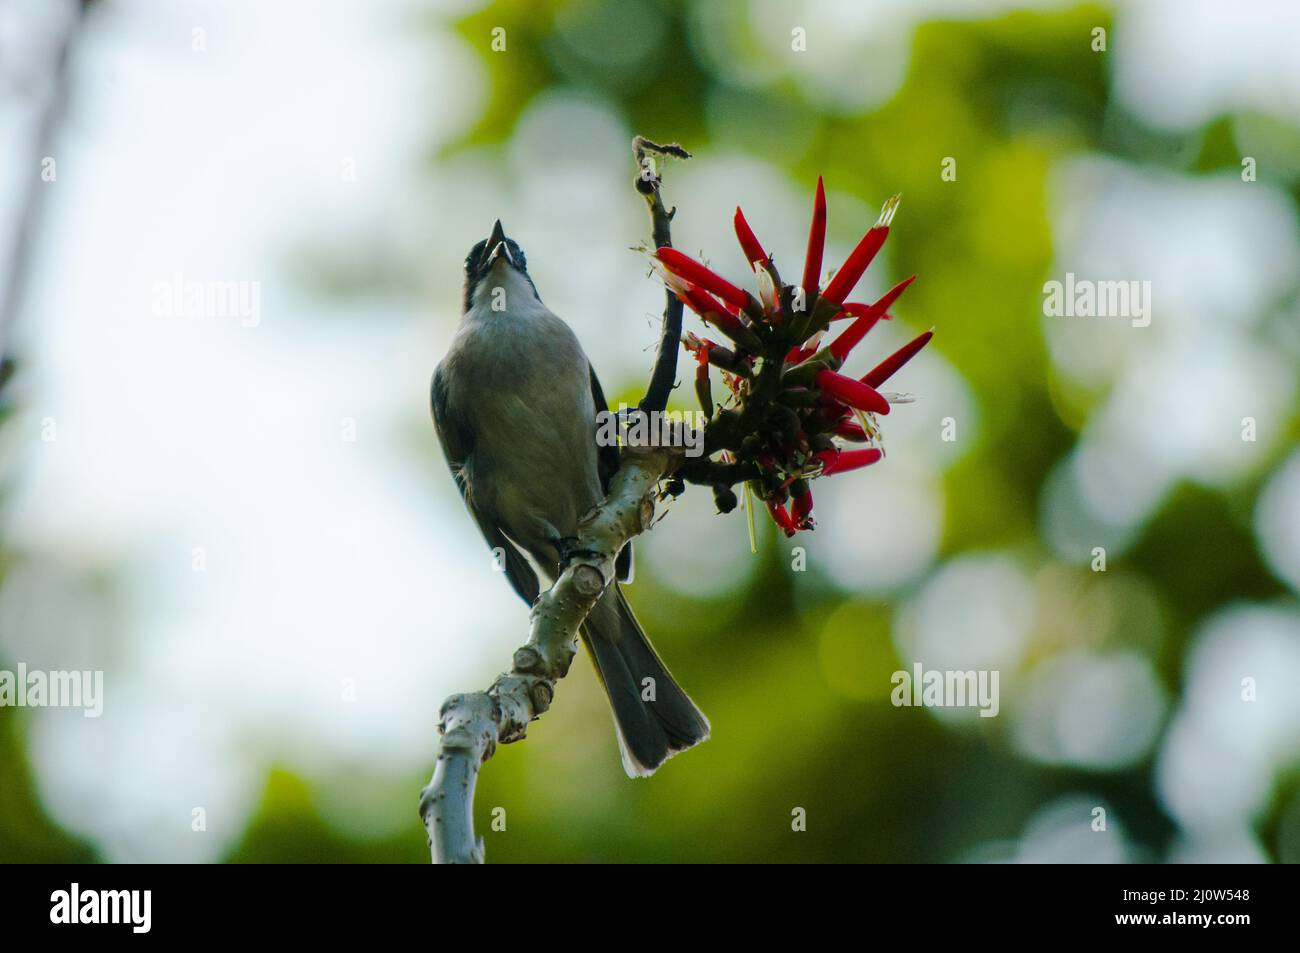 A low-angle shot of a bird perched of a twig with a flowering red plant on a blurred background Stock Photo